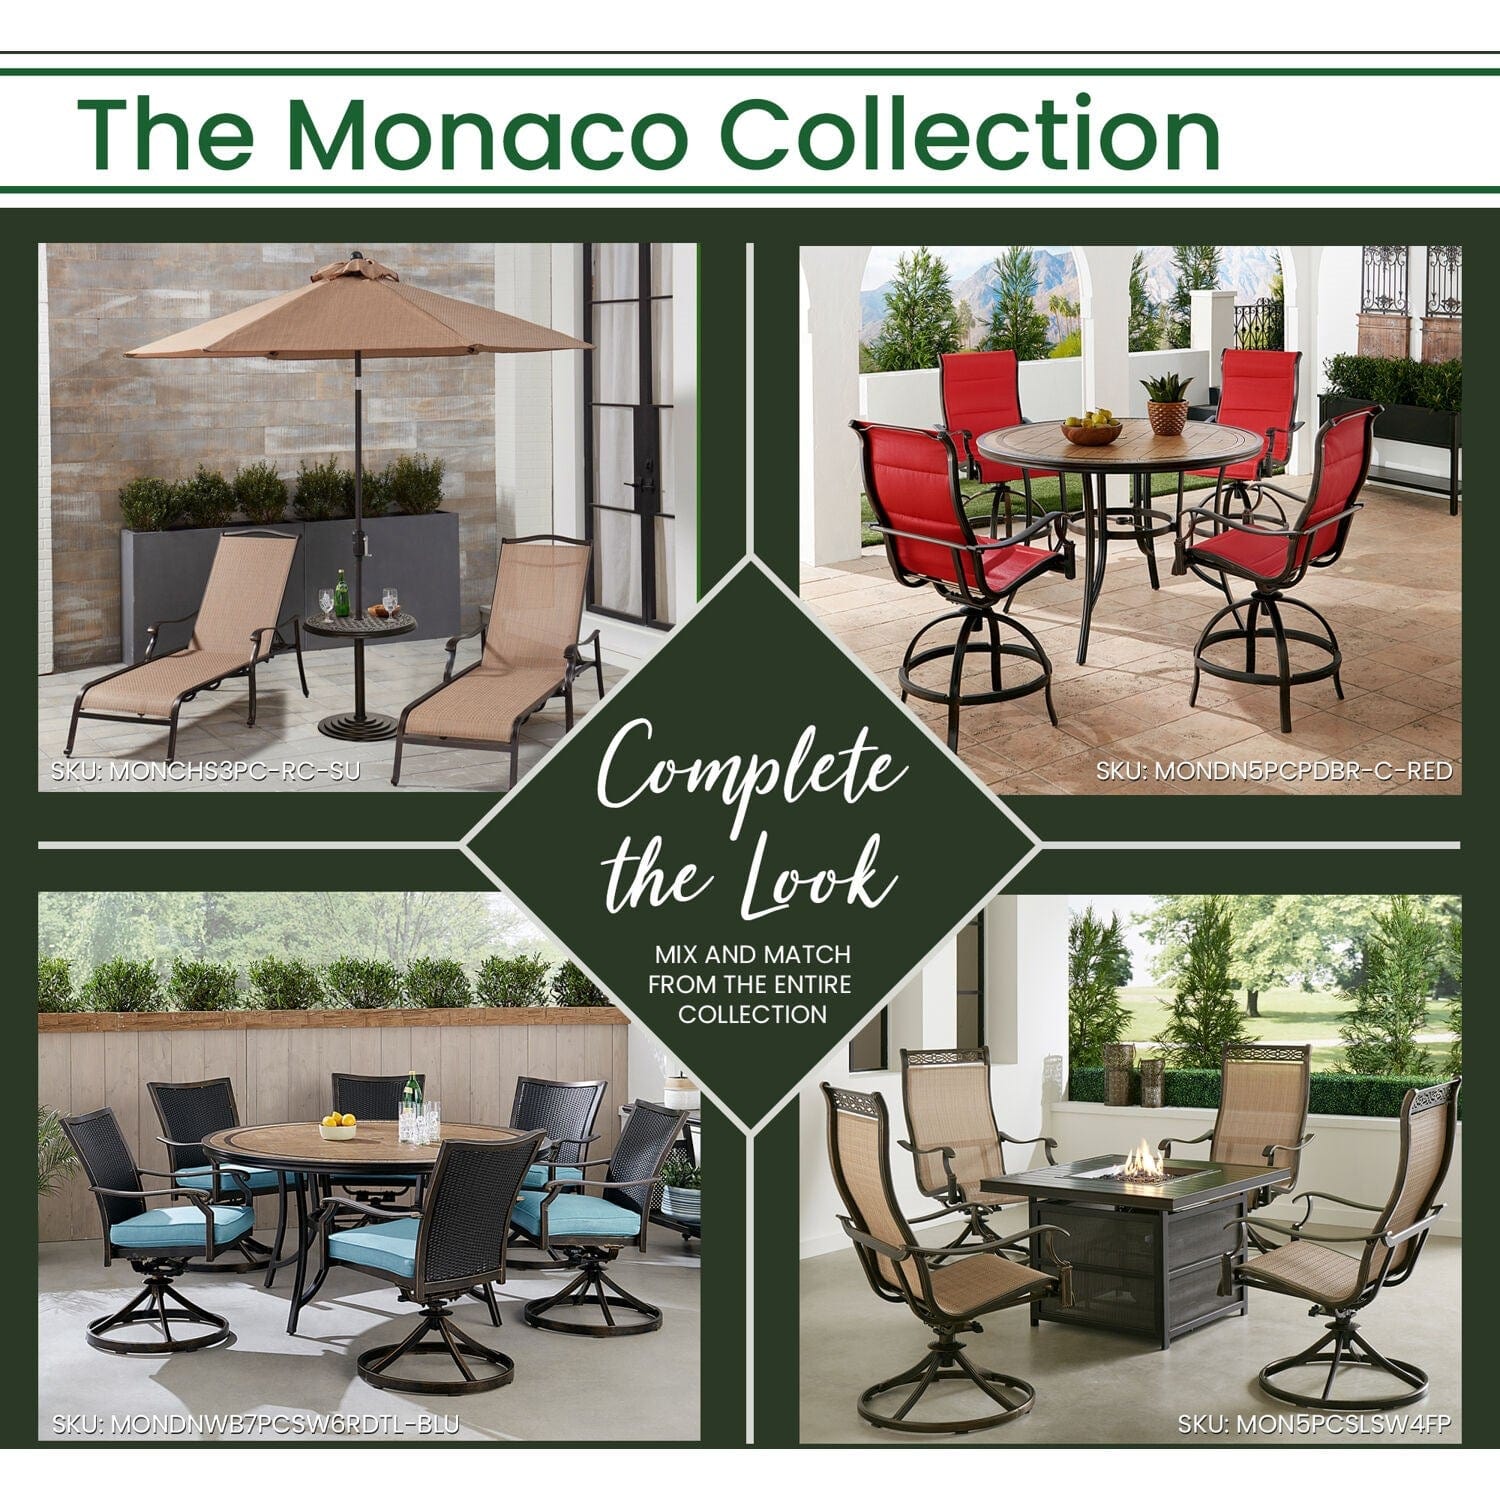 Hanover Outdoor Dining Set Hanover Monaco 7-Piece High-Dining Set in Blue with a 56 In. Tile-top Table and 6 Swivel Chairs | MONDN7PCBR-C-BLU